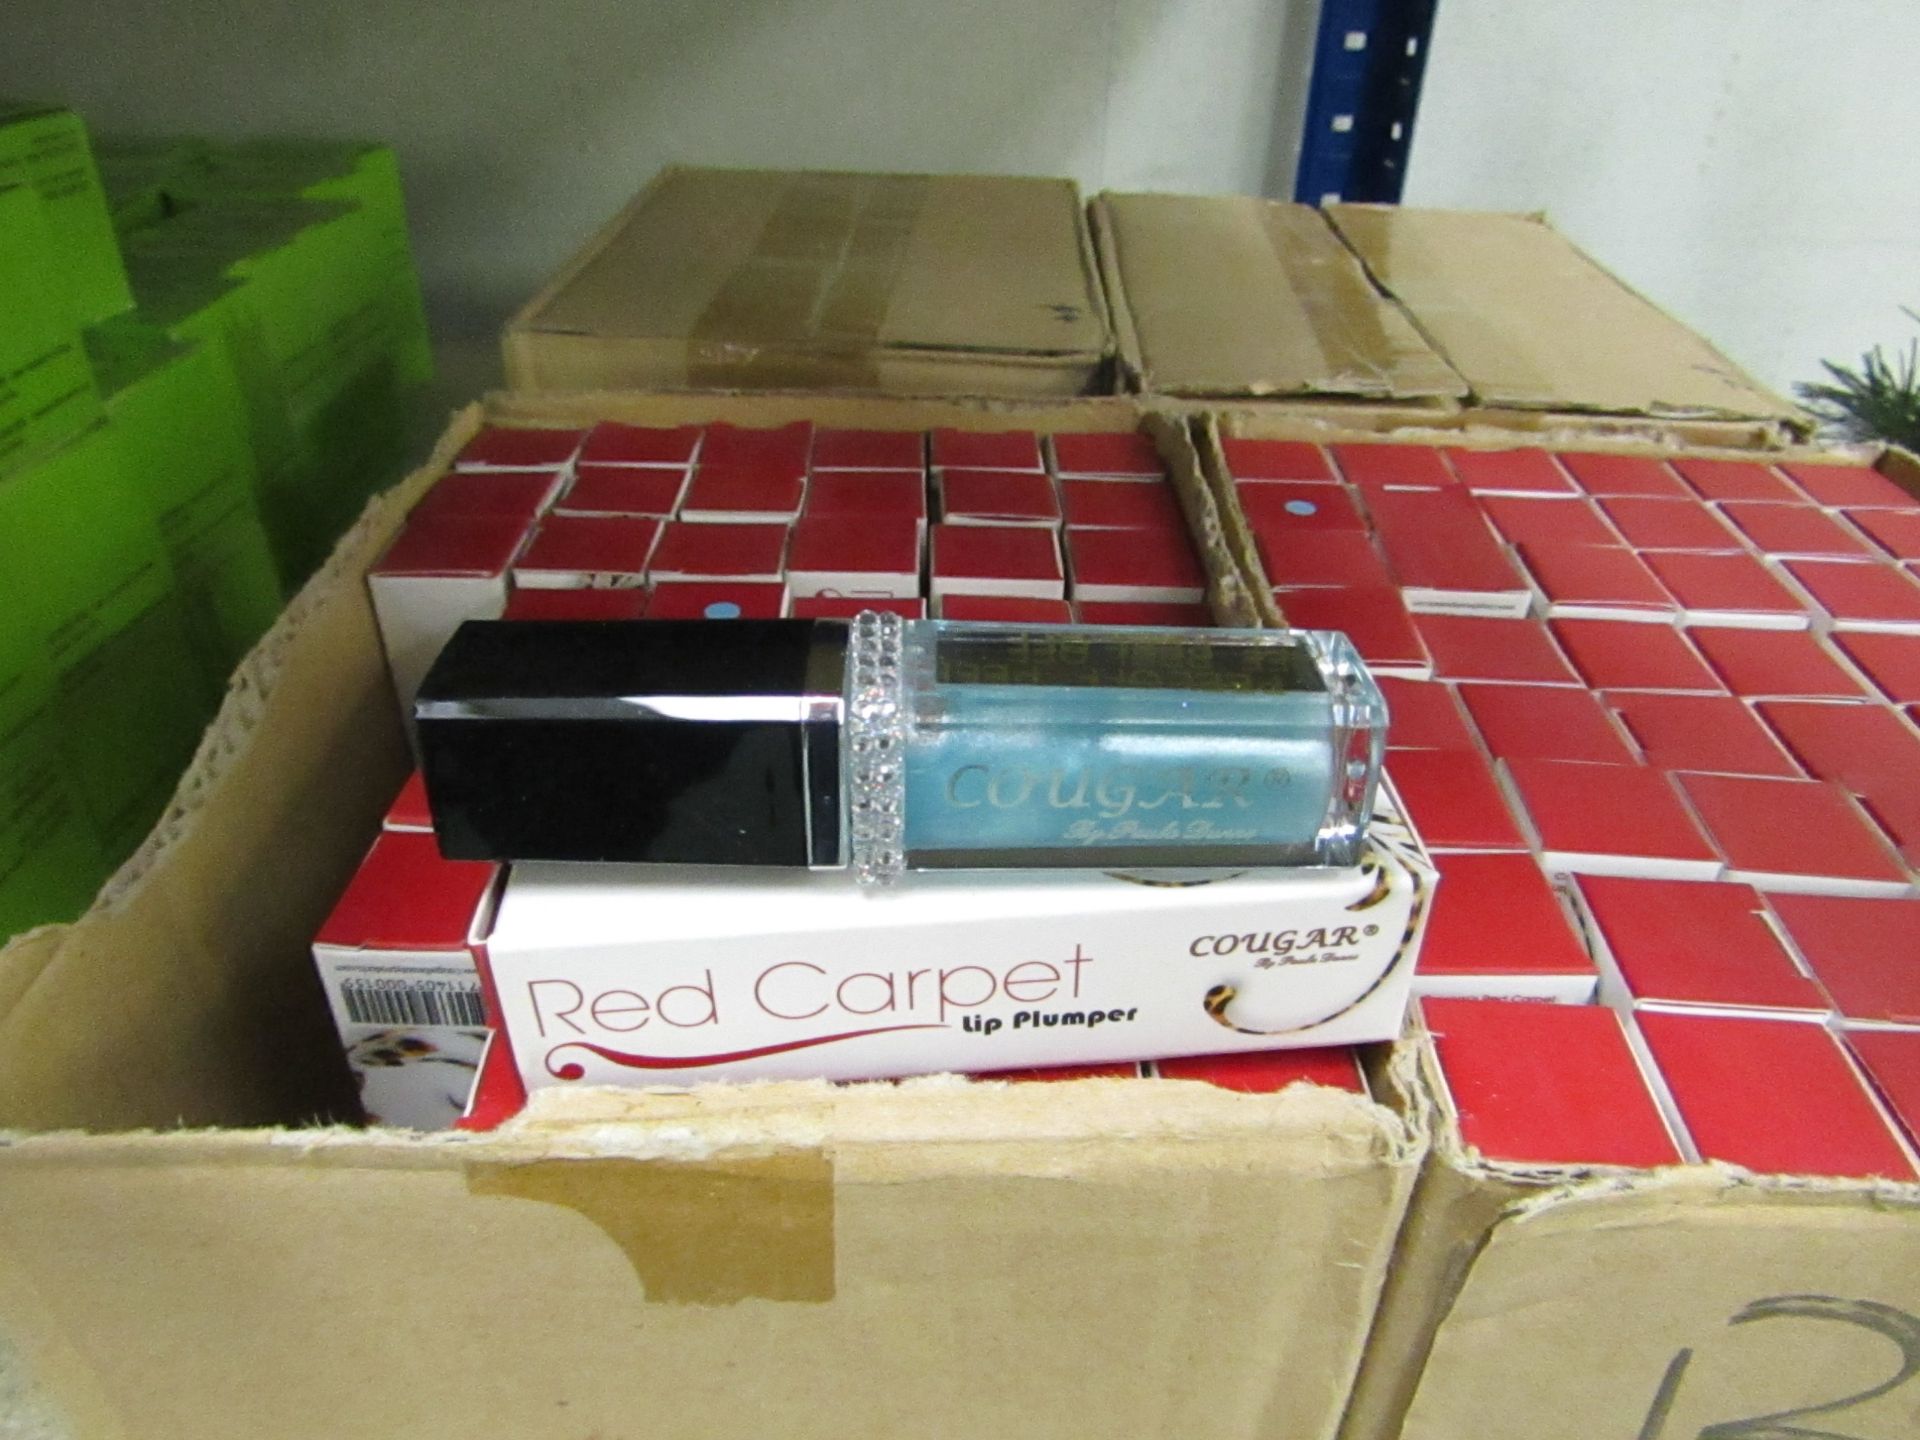 2 x Cougar Red Carpet Lip Plumper, Blue, both brand new and boxed.